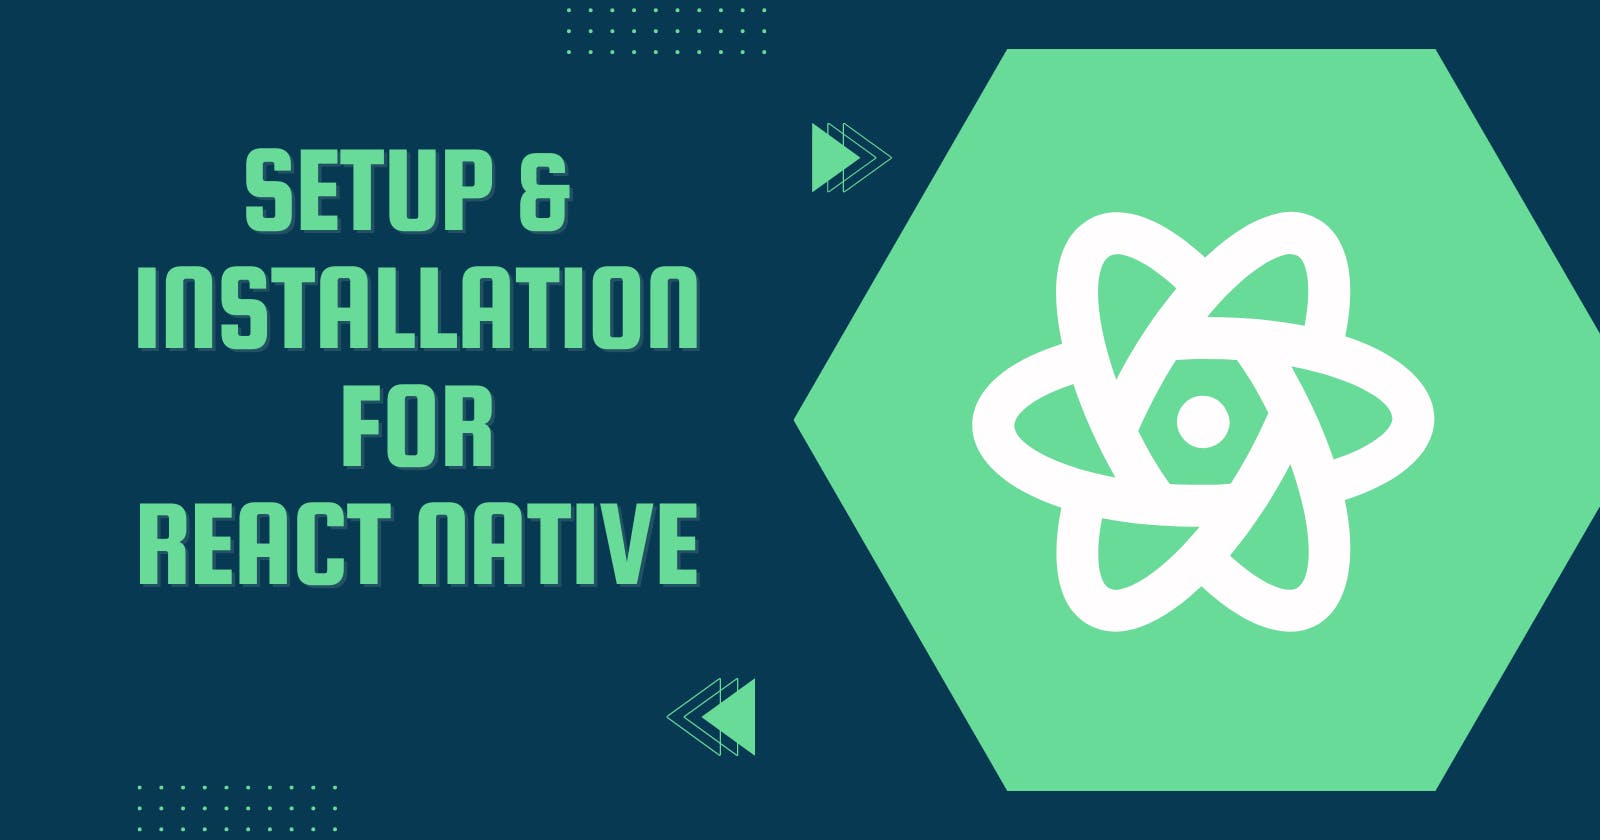 Prerequisites and Installation Guide for React Native